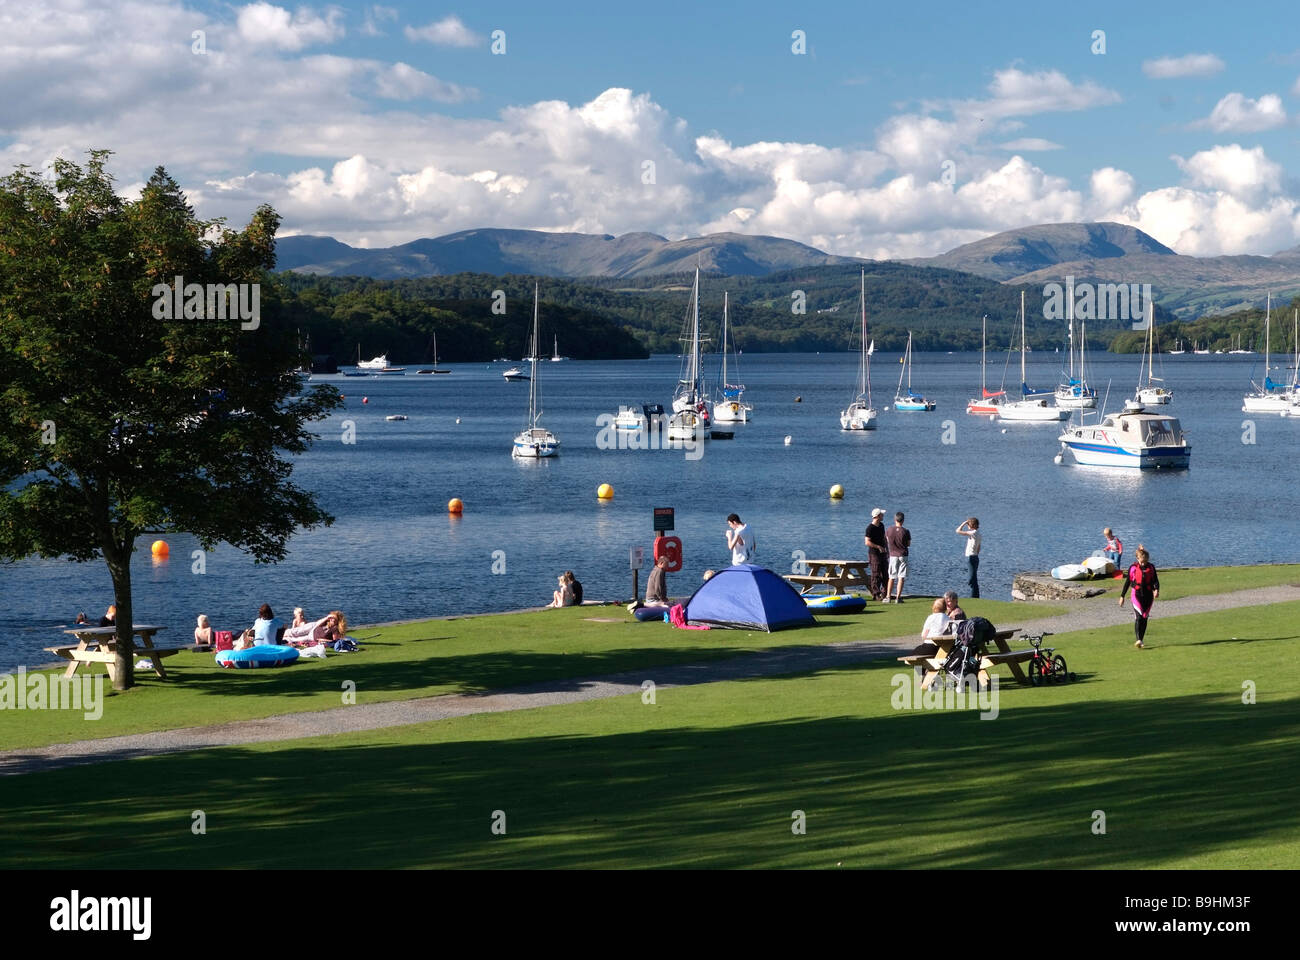 Lake and boats, waterside lawn and people, Lake Windermeere, Lake District, Great Britain, Europe Stock Photo